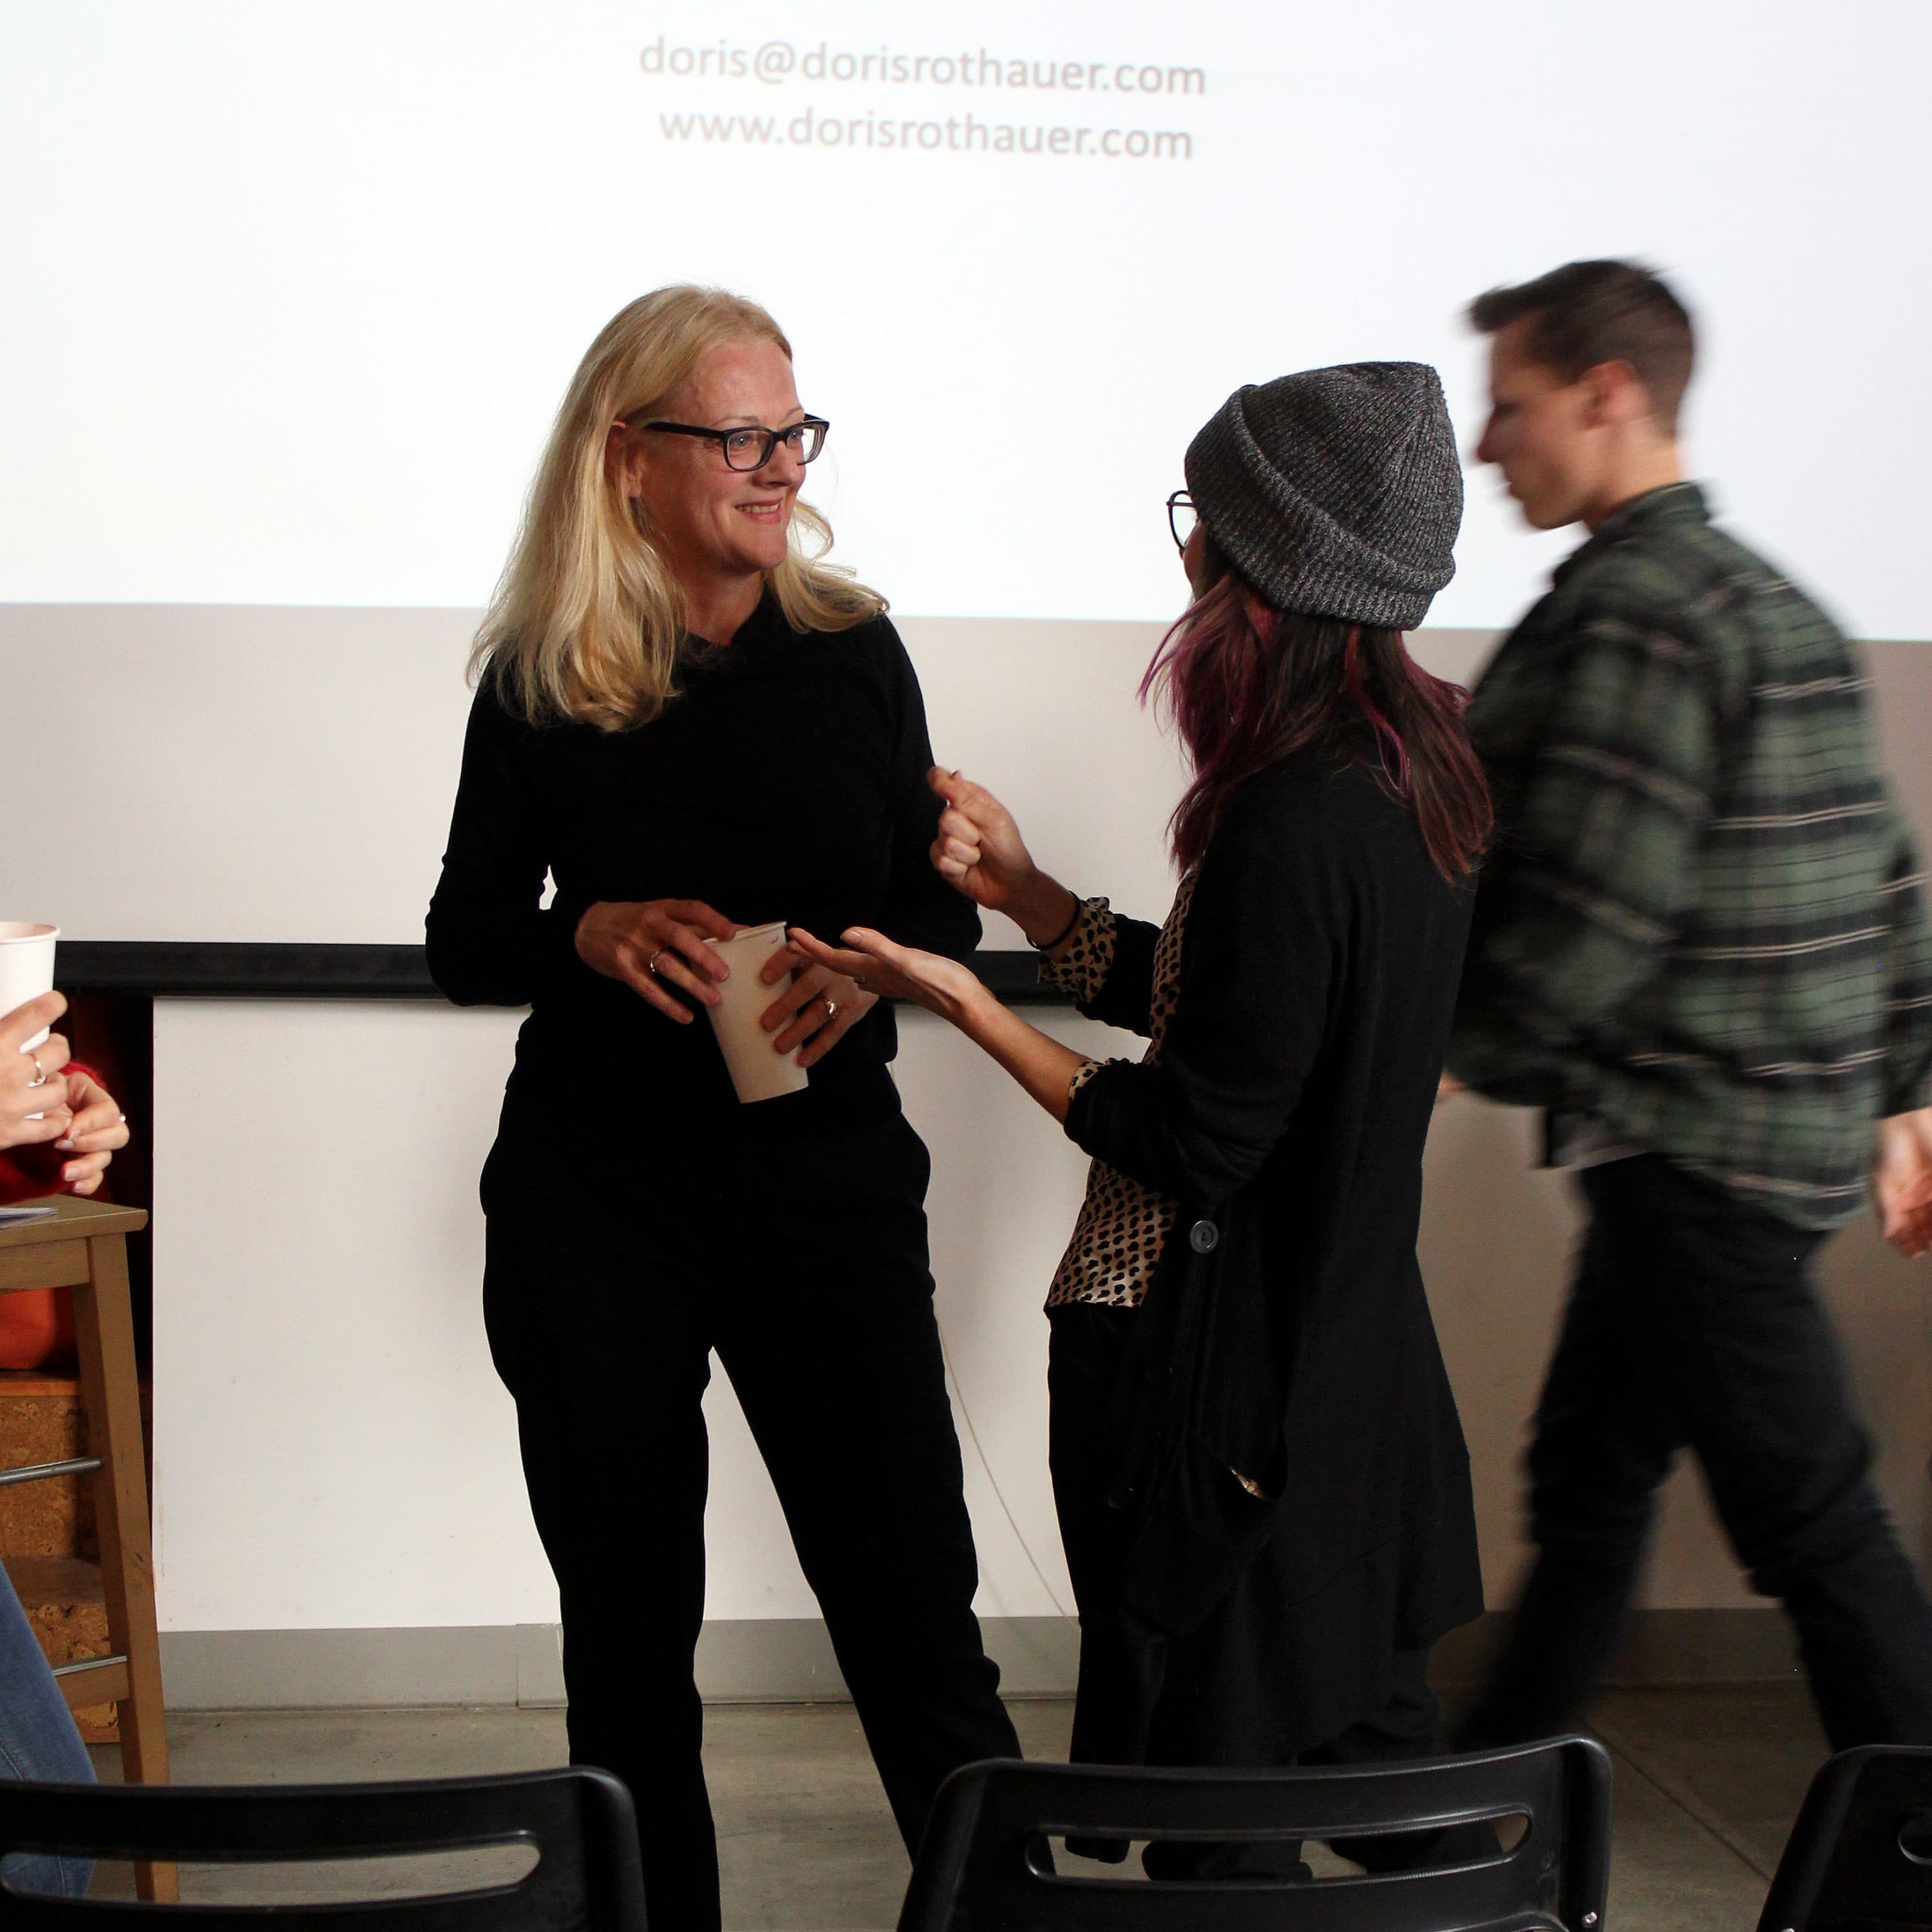 A woman with long blonde hair, wearing glasses and holding a cup, stands talking to another woman with dark hair and a beanie hat. They are indoors with a presentation screen in the background displaying a "Thank You!" message and an email address.